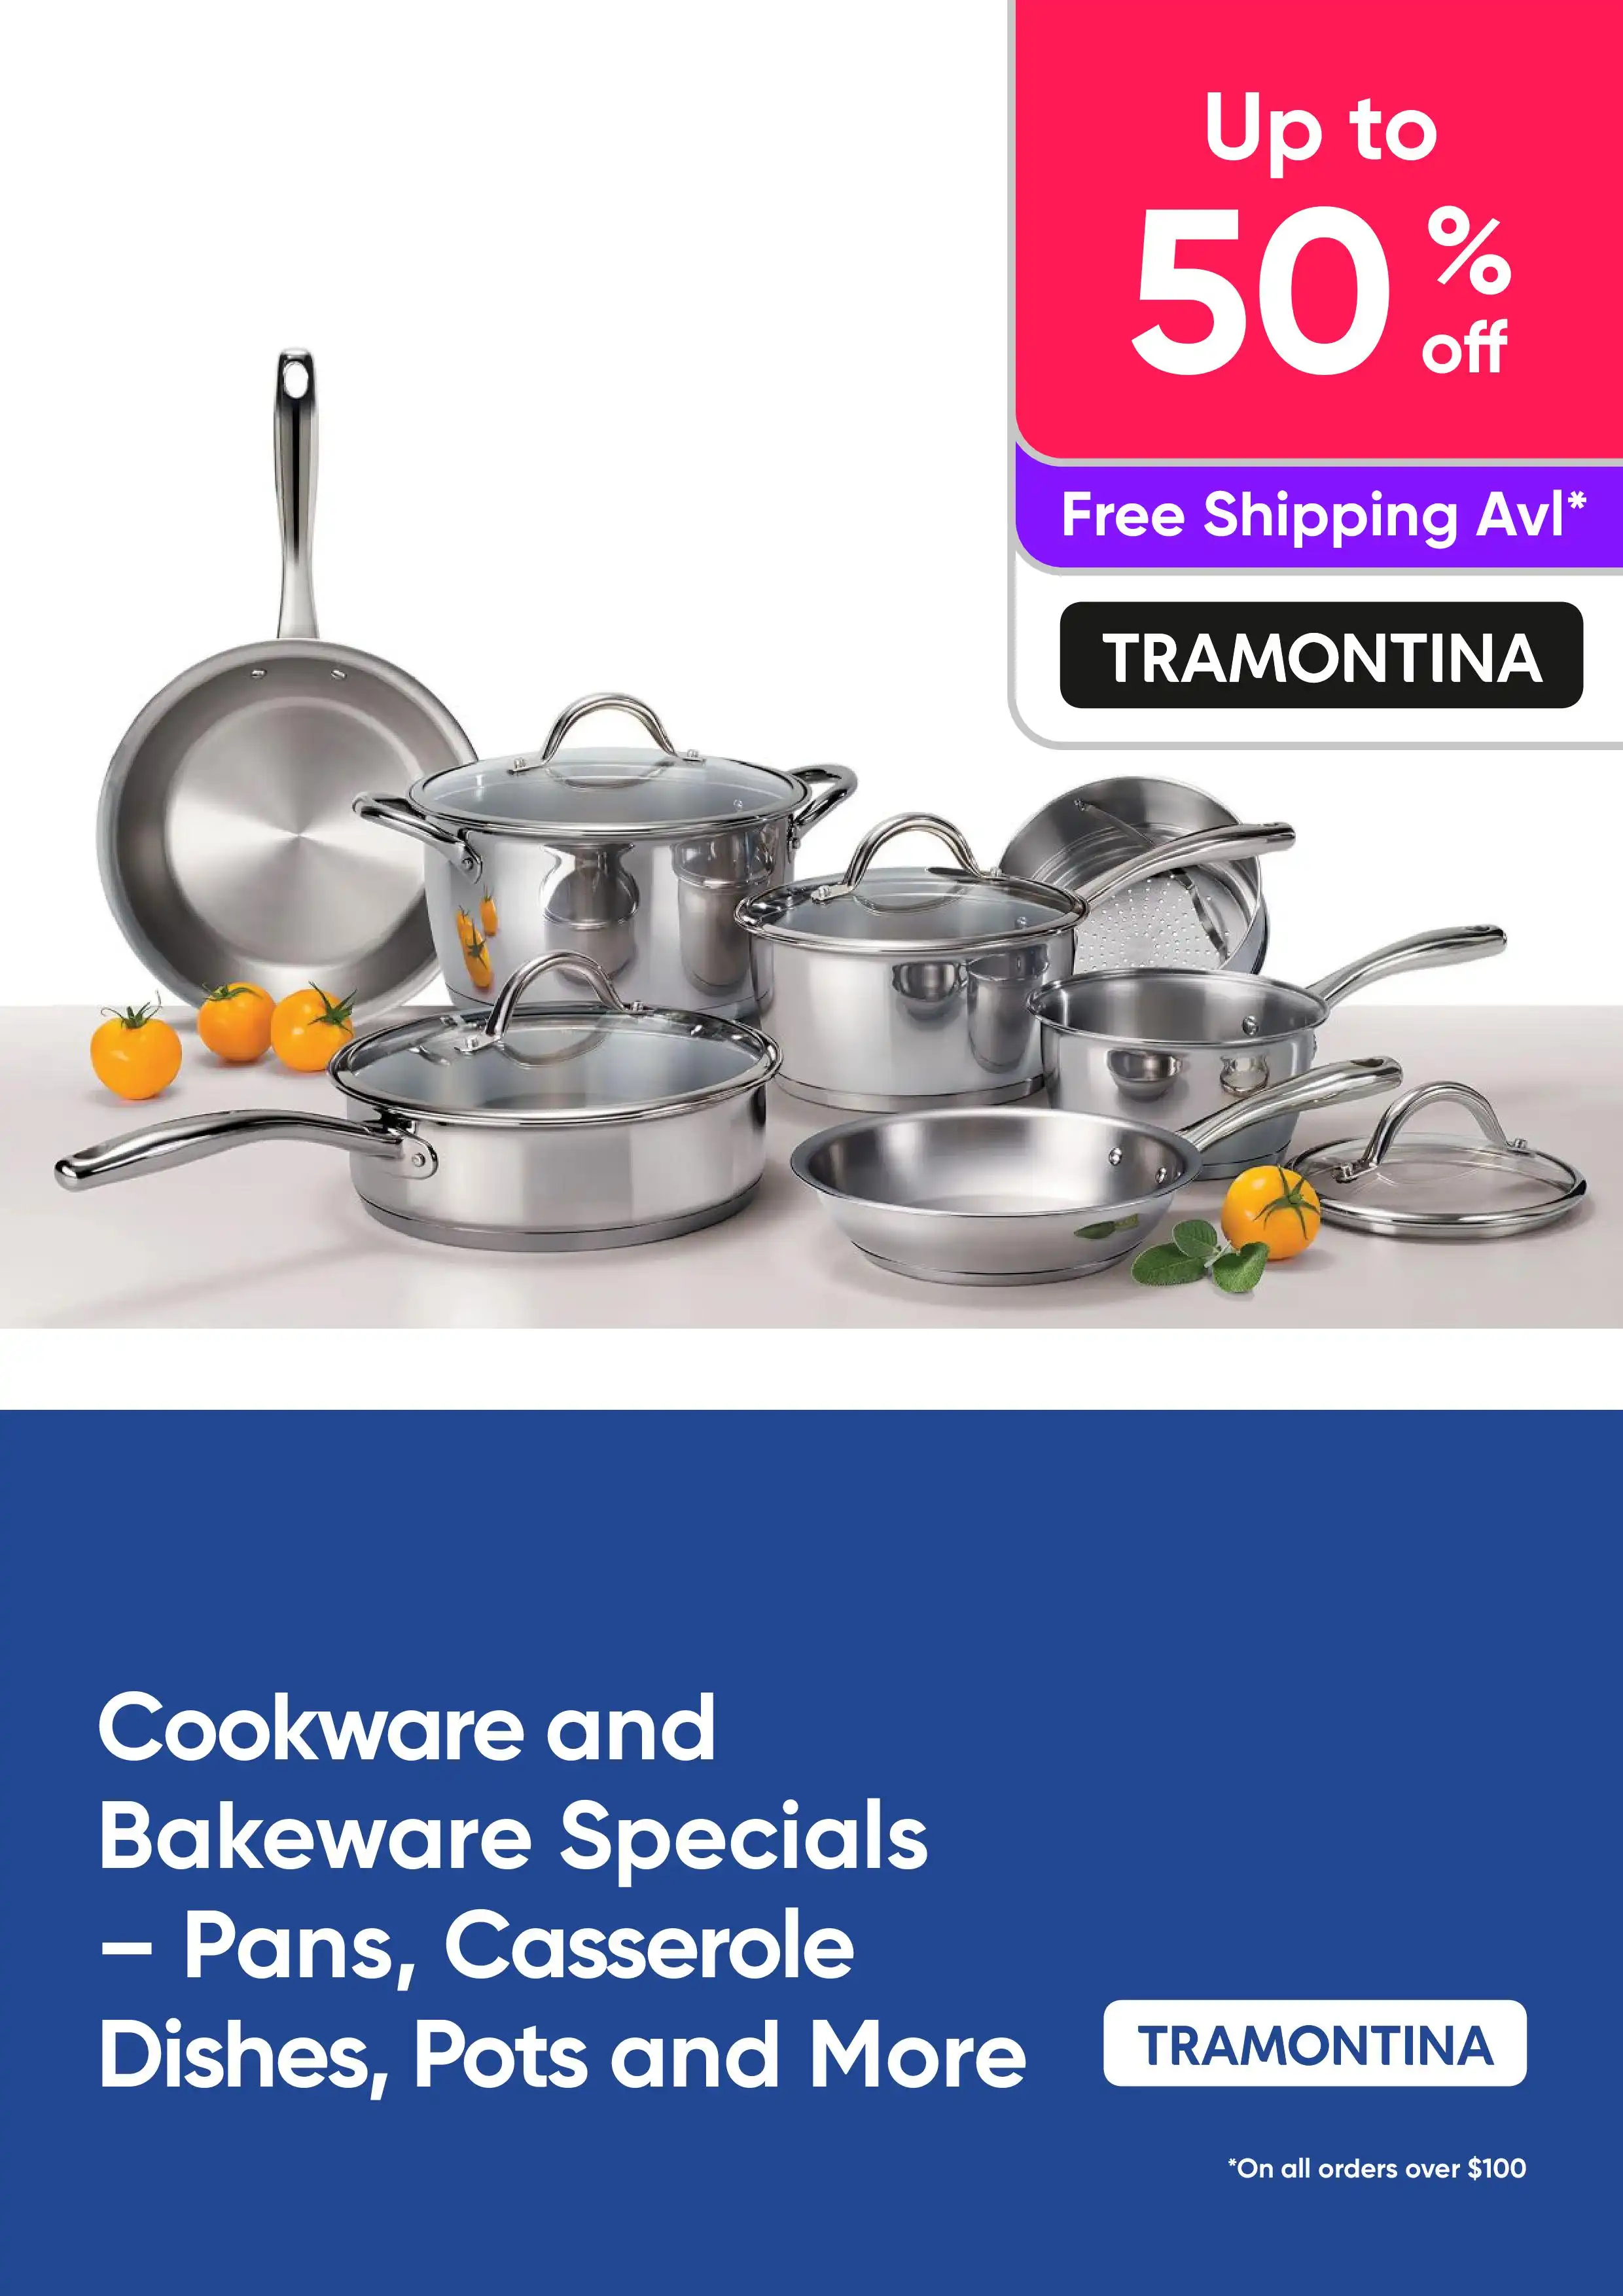 Tramontina Cookware and Bakeware Specials – Pans, Casserole Dishes, Pots and More - Up to 50% off